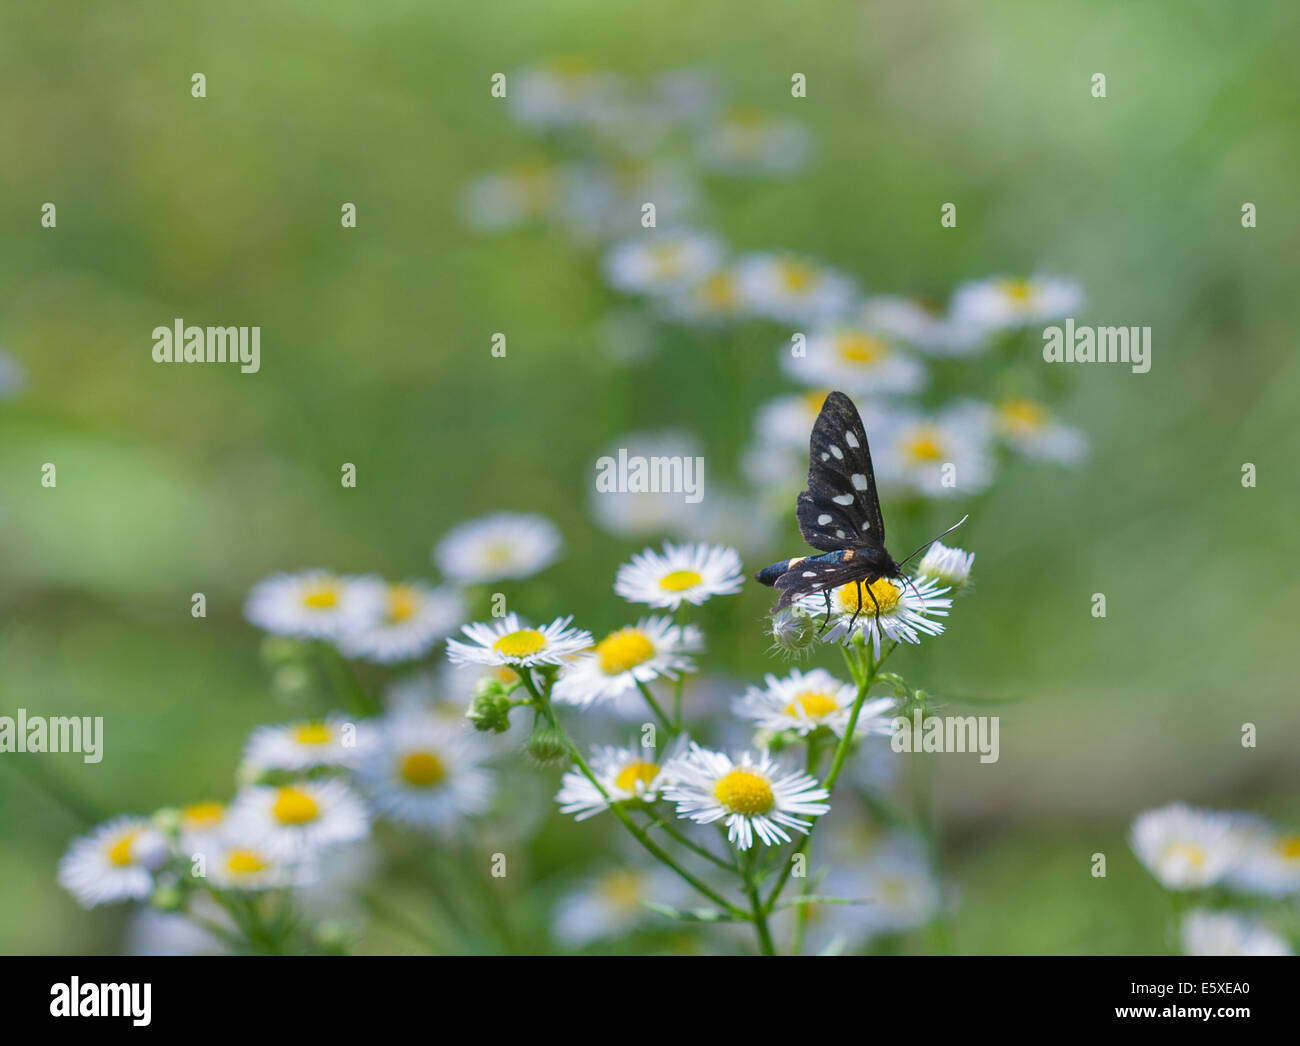 Black spotted butterfly on a white daisy macro Stock Photo